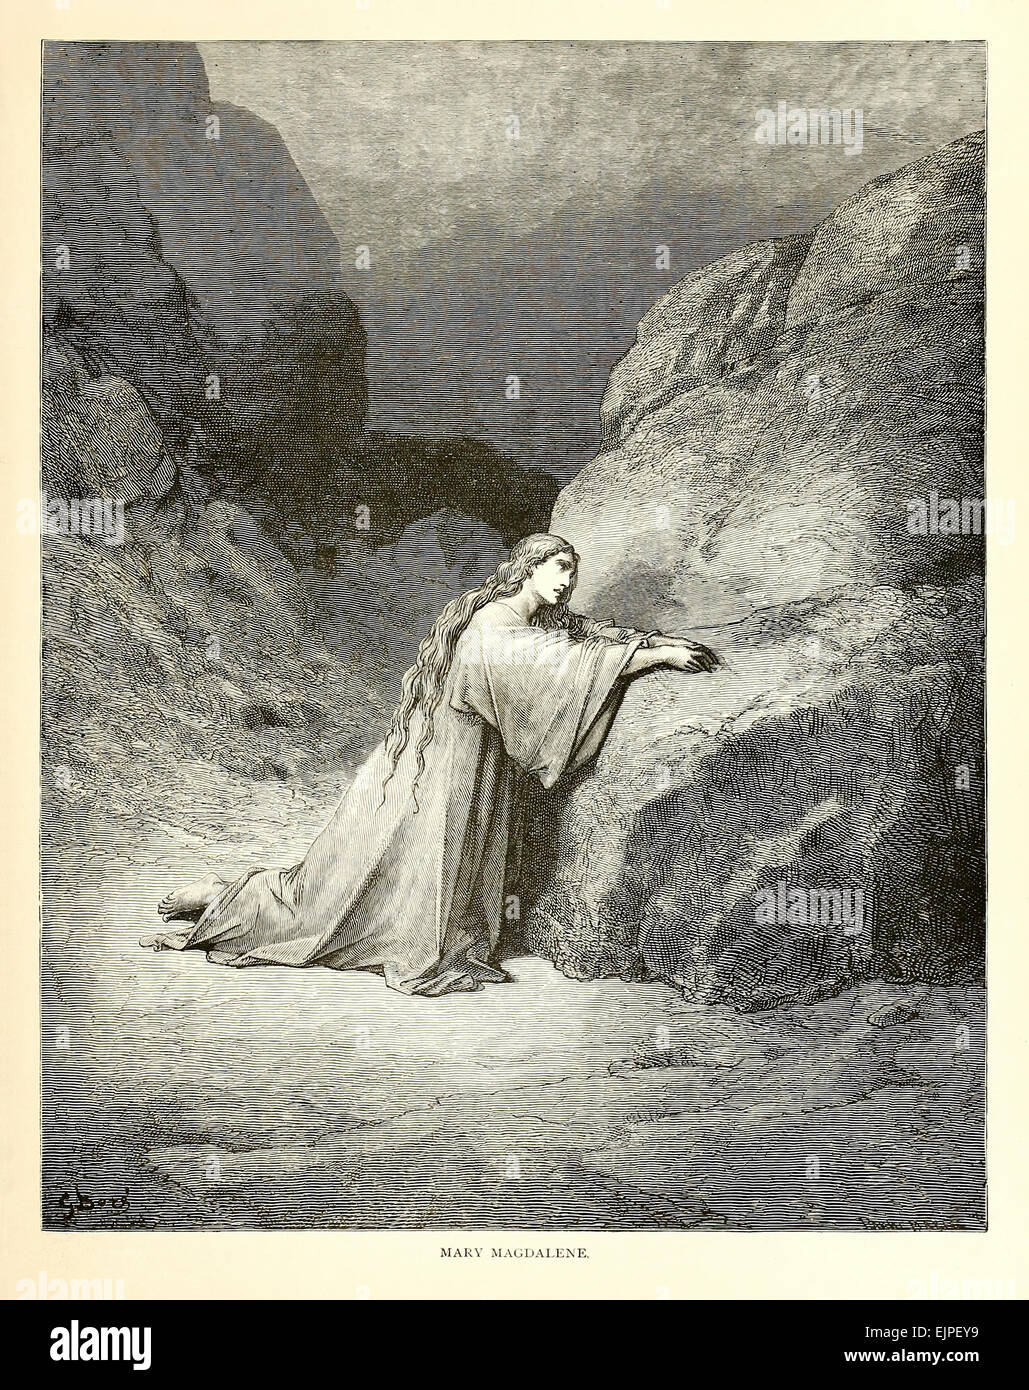 Mary Magdalene - Illustration by Paul Gustave Doré (1832-1883) from 1880 edition of the Bible. See description for more information. Stock Photo